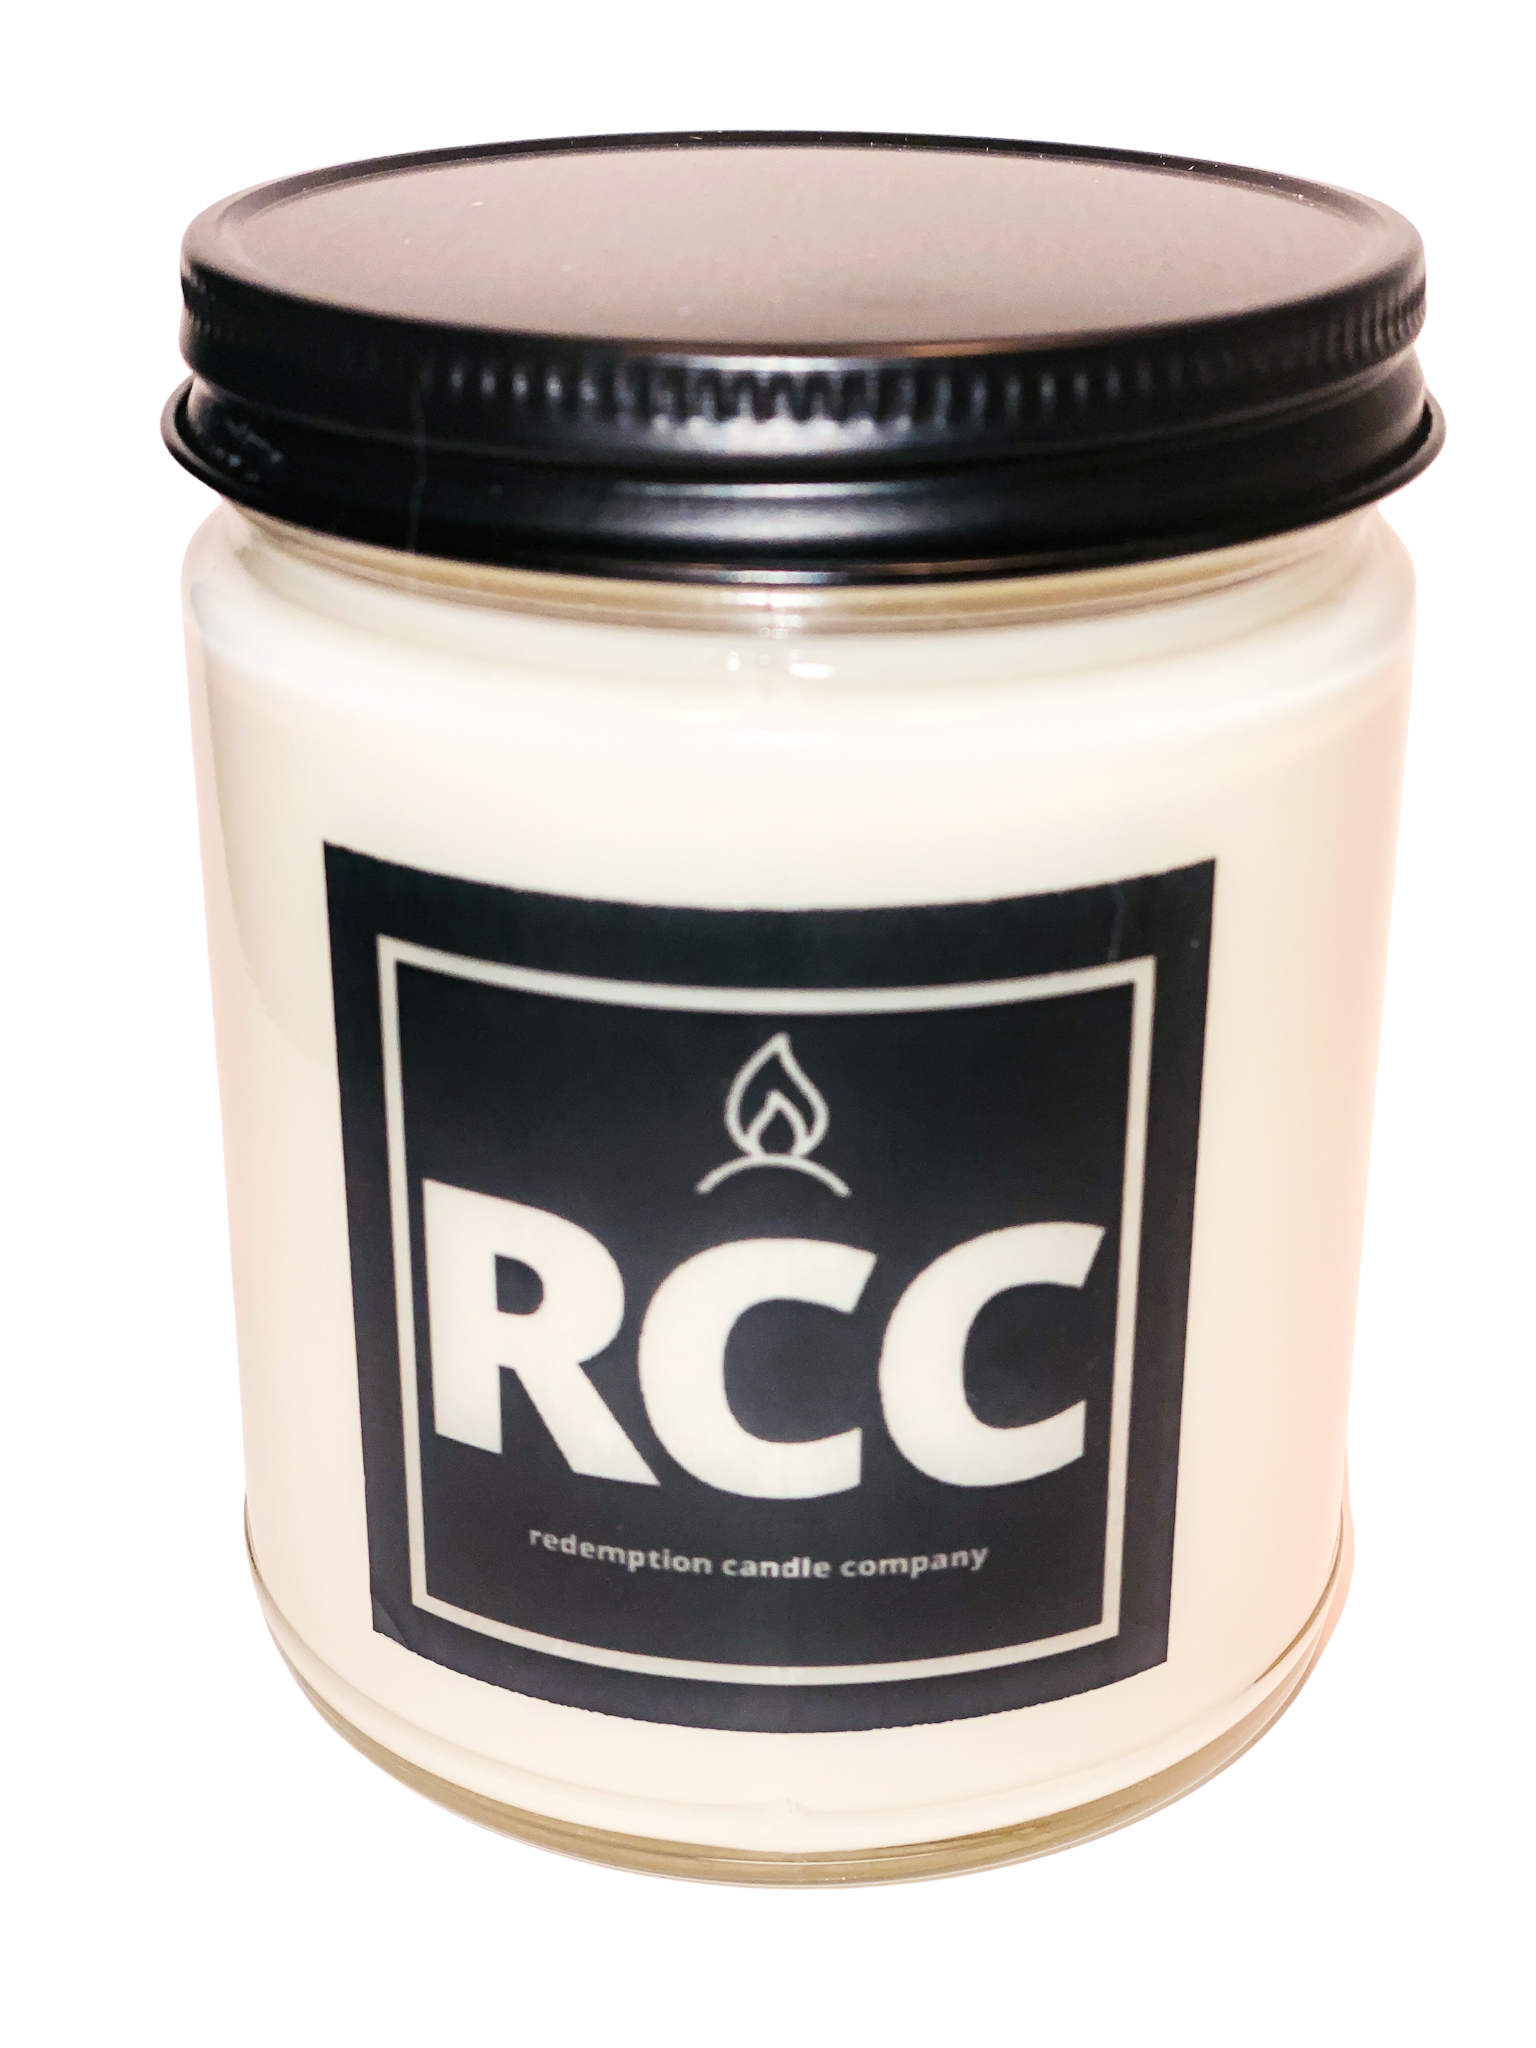 Library - Redemption Candle Company